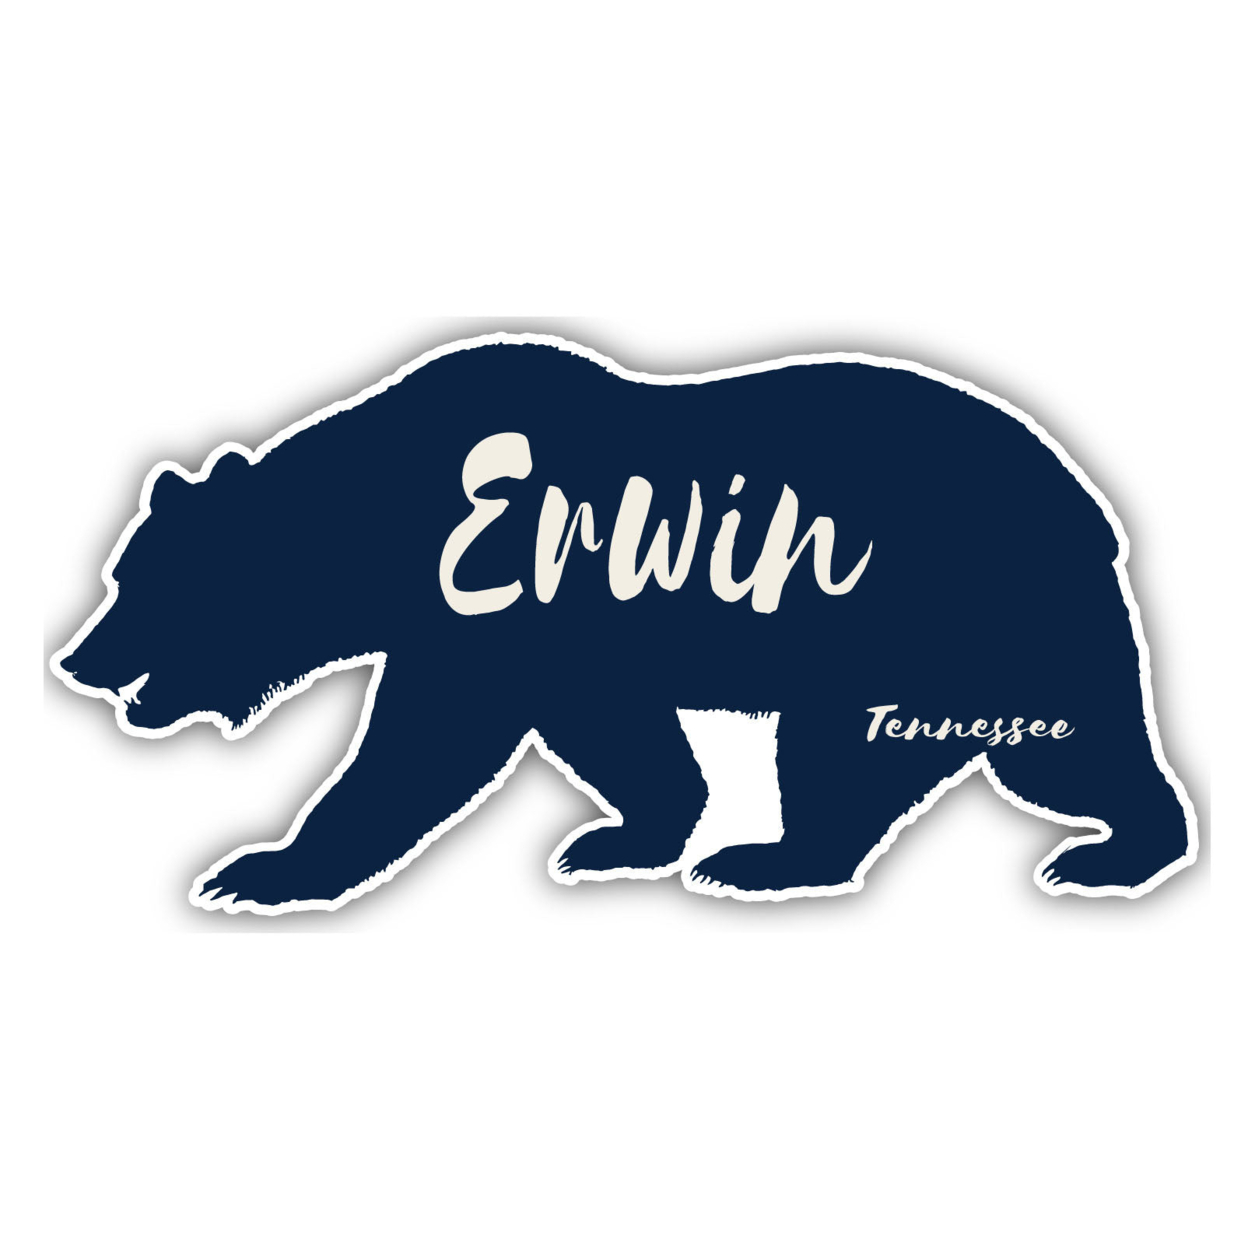 Erwin Tennessee Souvenir Decorative Stickers (Choose Theme And Size) - Single Unit, 4-Inch, Bear